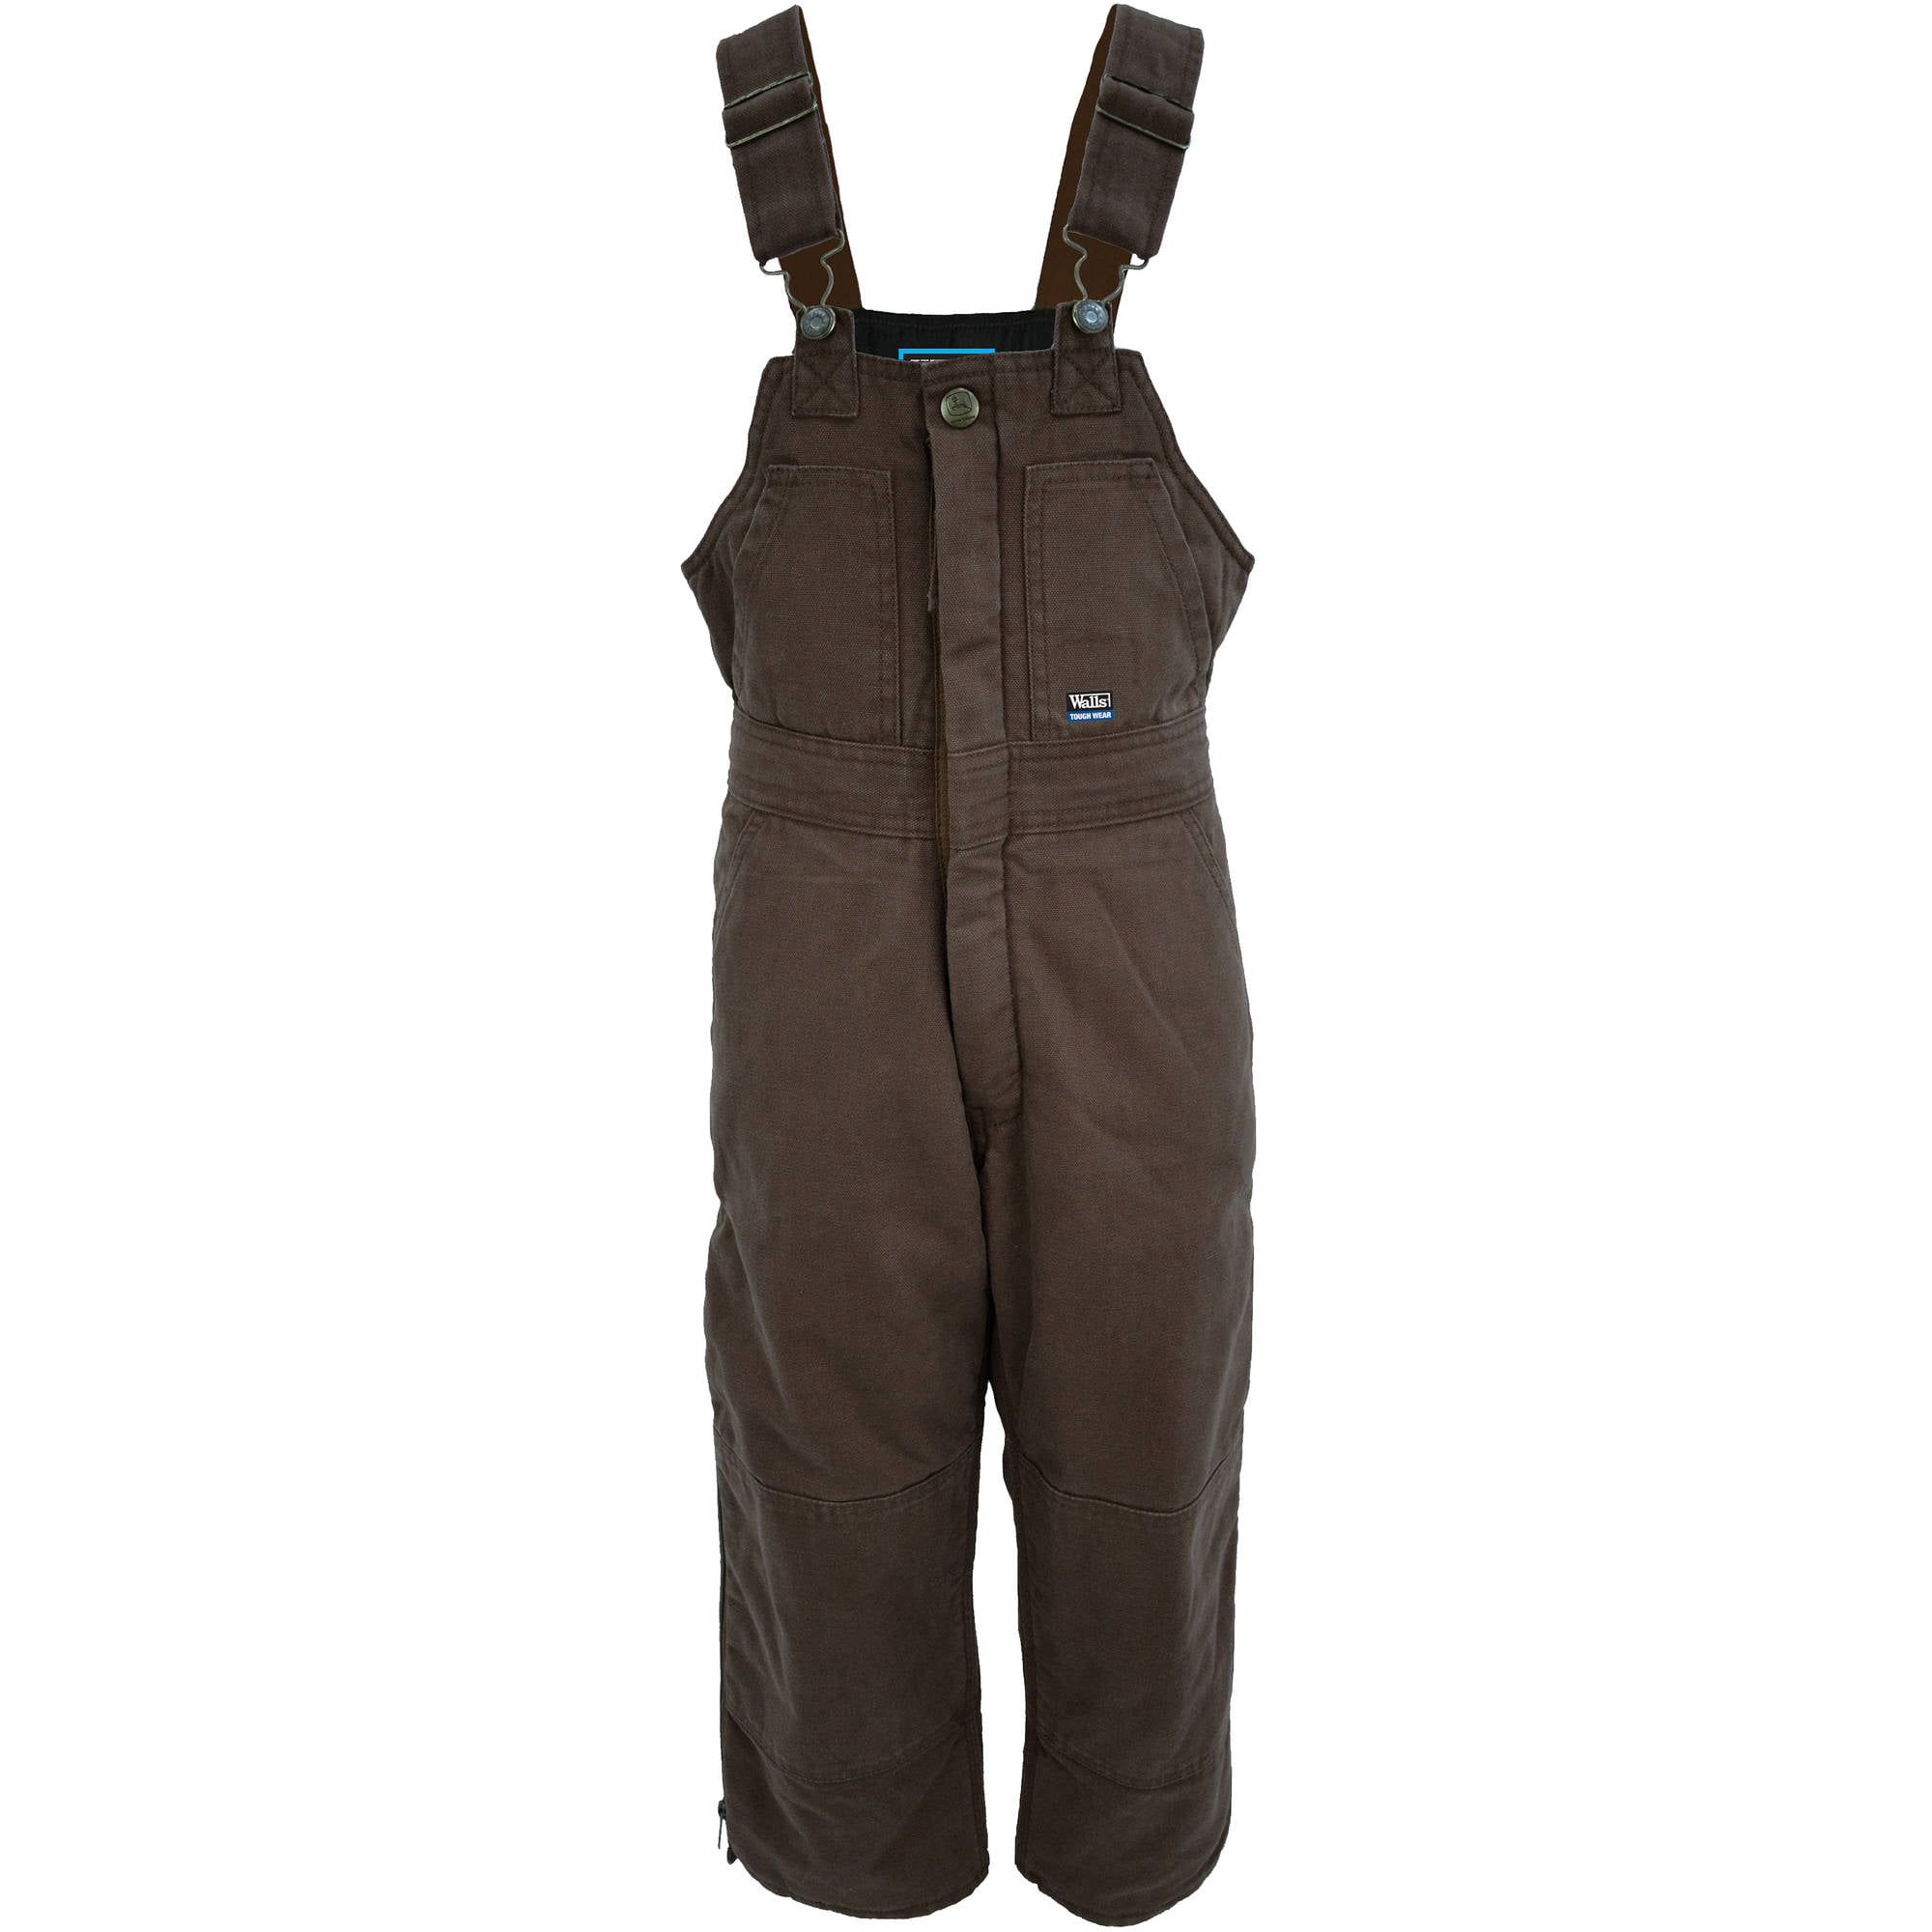 Walls Youth Coveralls Size Chart